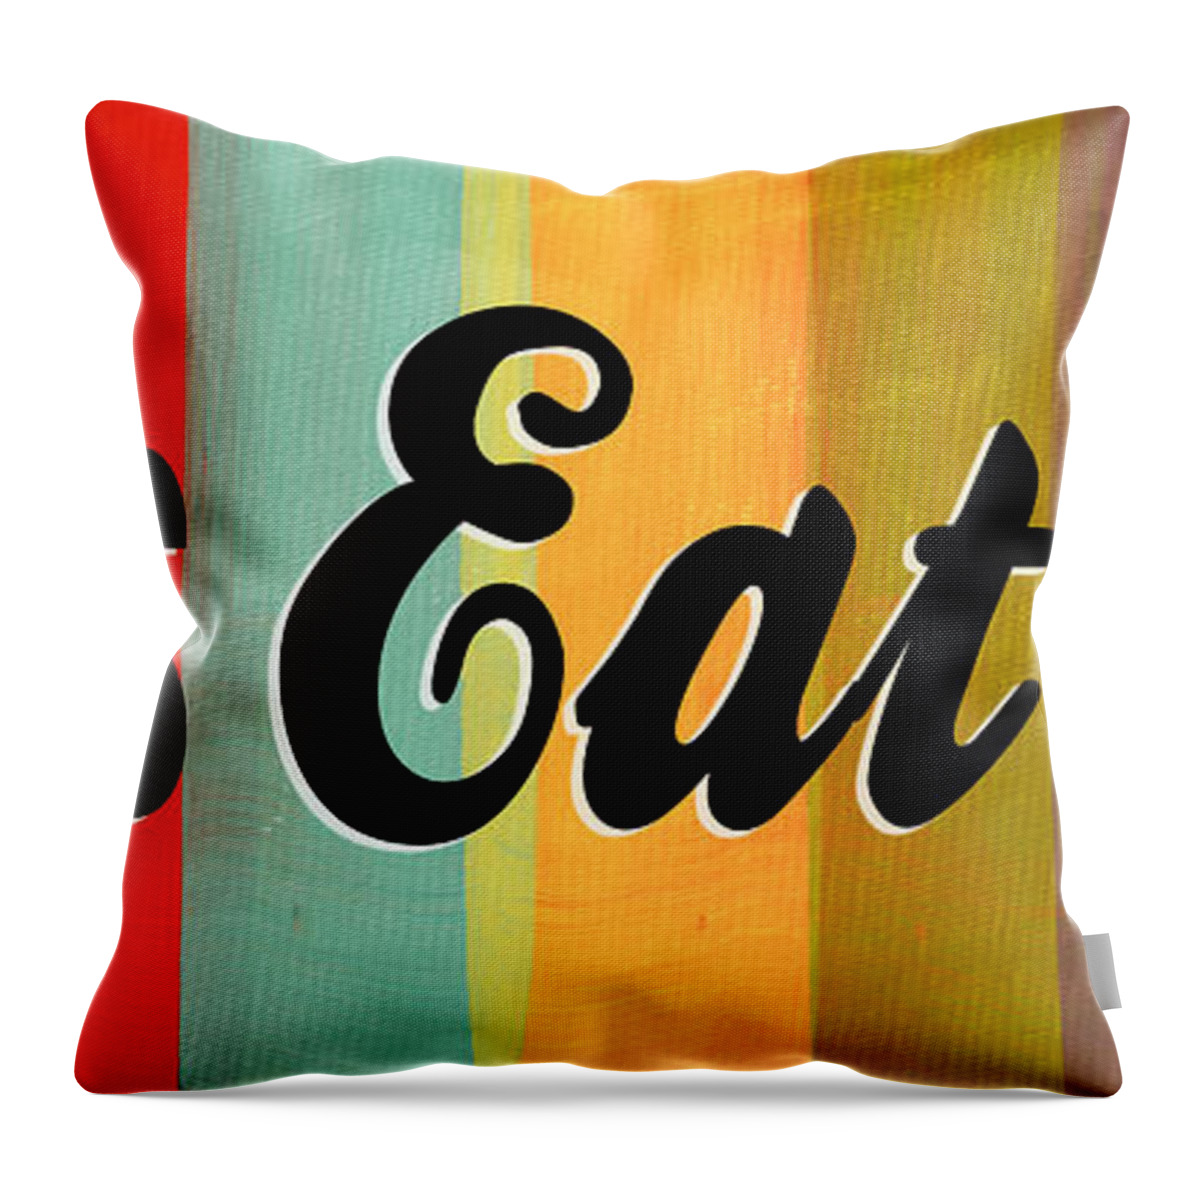 Eat Throw Pillow featuring the mixed media Let's Eat This by Linda Woods